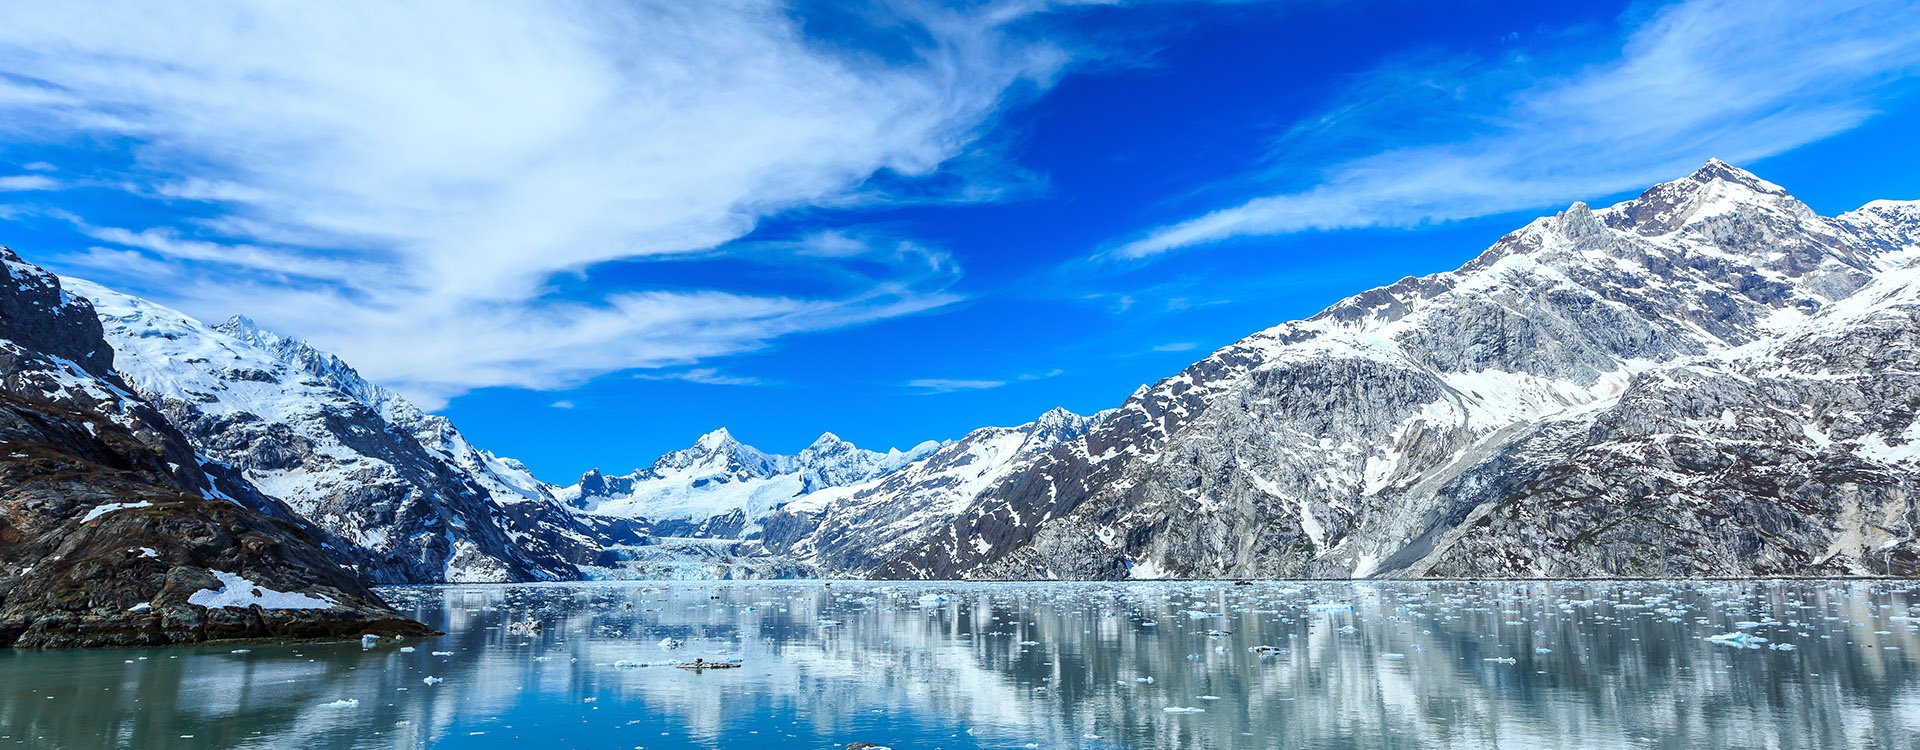 Panoramic view of Glacier Bay national Park. John Hopkins Glacier with Mount Orville and Mount Wilbur in the background. Alaska